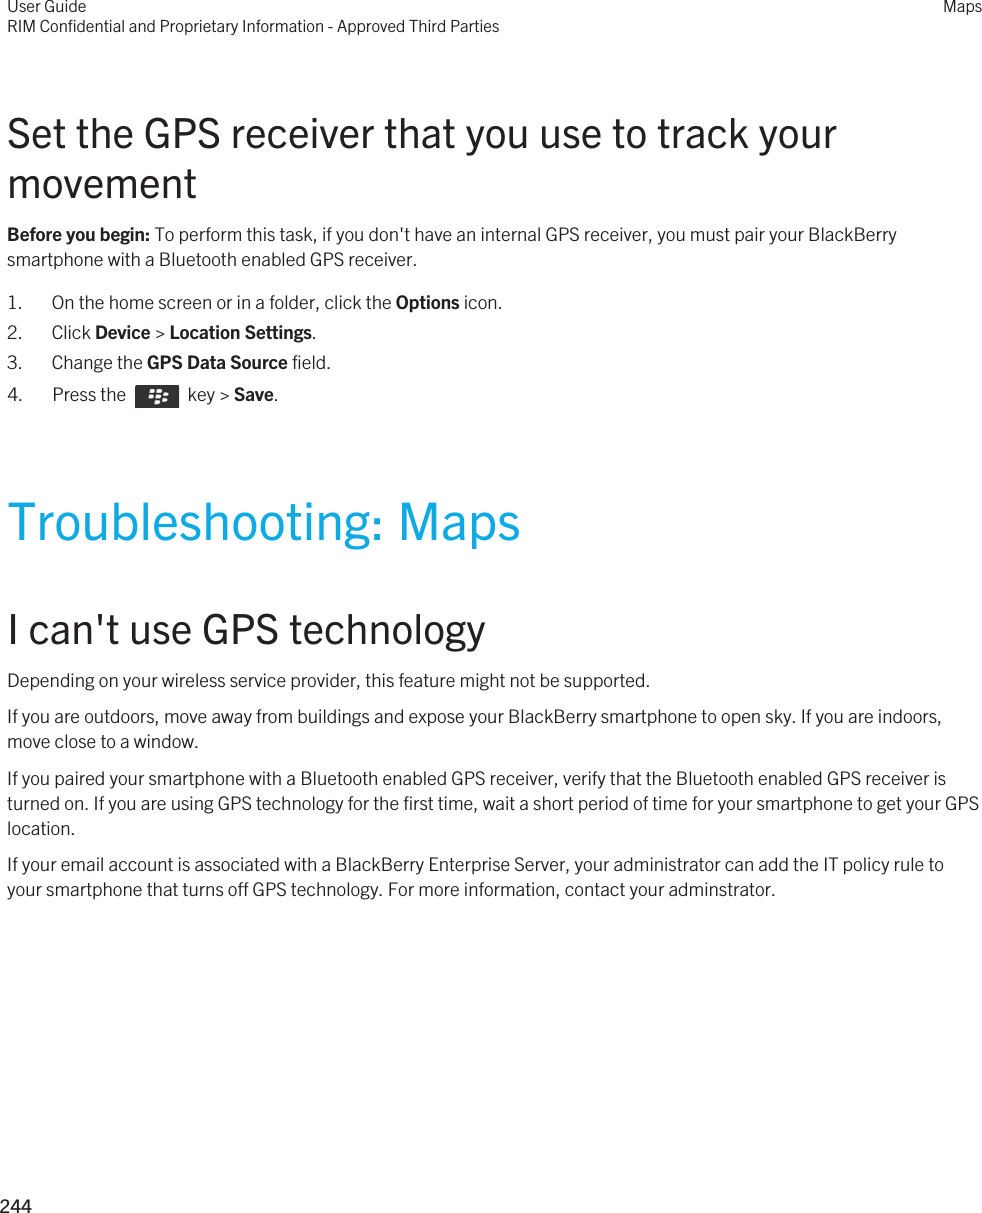 Set the GPS receiver that you use to track your movementBefore you begin: To perform this task, if you don&apos;t have an internal GPS receiver, you must pair your BlackBerry smartphone with a Bluetooth enabled GPS receiver.1. On the home screen or in a folder, click the Options icon.2. Click Device &gt; Location Settings.3. Change the GPS Data Source field.4.  Press the    key &gt; Save. Troubleshooting: MapsI can&apos;t use GPS technologyDepending on your wireless service provider, this feature might not be supported. If you are outdoors, move away from buildings and expose your BlackBerry smartphone to open sky. If you are indoors, move close to a window.If you paired your smartphone with a Bluetooth enabled GPS receiver, verify that the Bluetooth enabled GPS receiver is turned on. If you are using GPS technology for the first time, wait a short period of time for your smartphone to get your GPS location.If your email account is associated with a BlackBerry Enterprise Server, your administrator can add the IT policy rule to your smartphone that turns off GPS technology. For more information, contact your adminstrator.User GuideRIM Confidential and Proprietary Information - Approved Third PartiesMaps244 